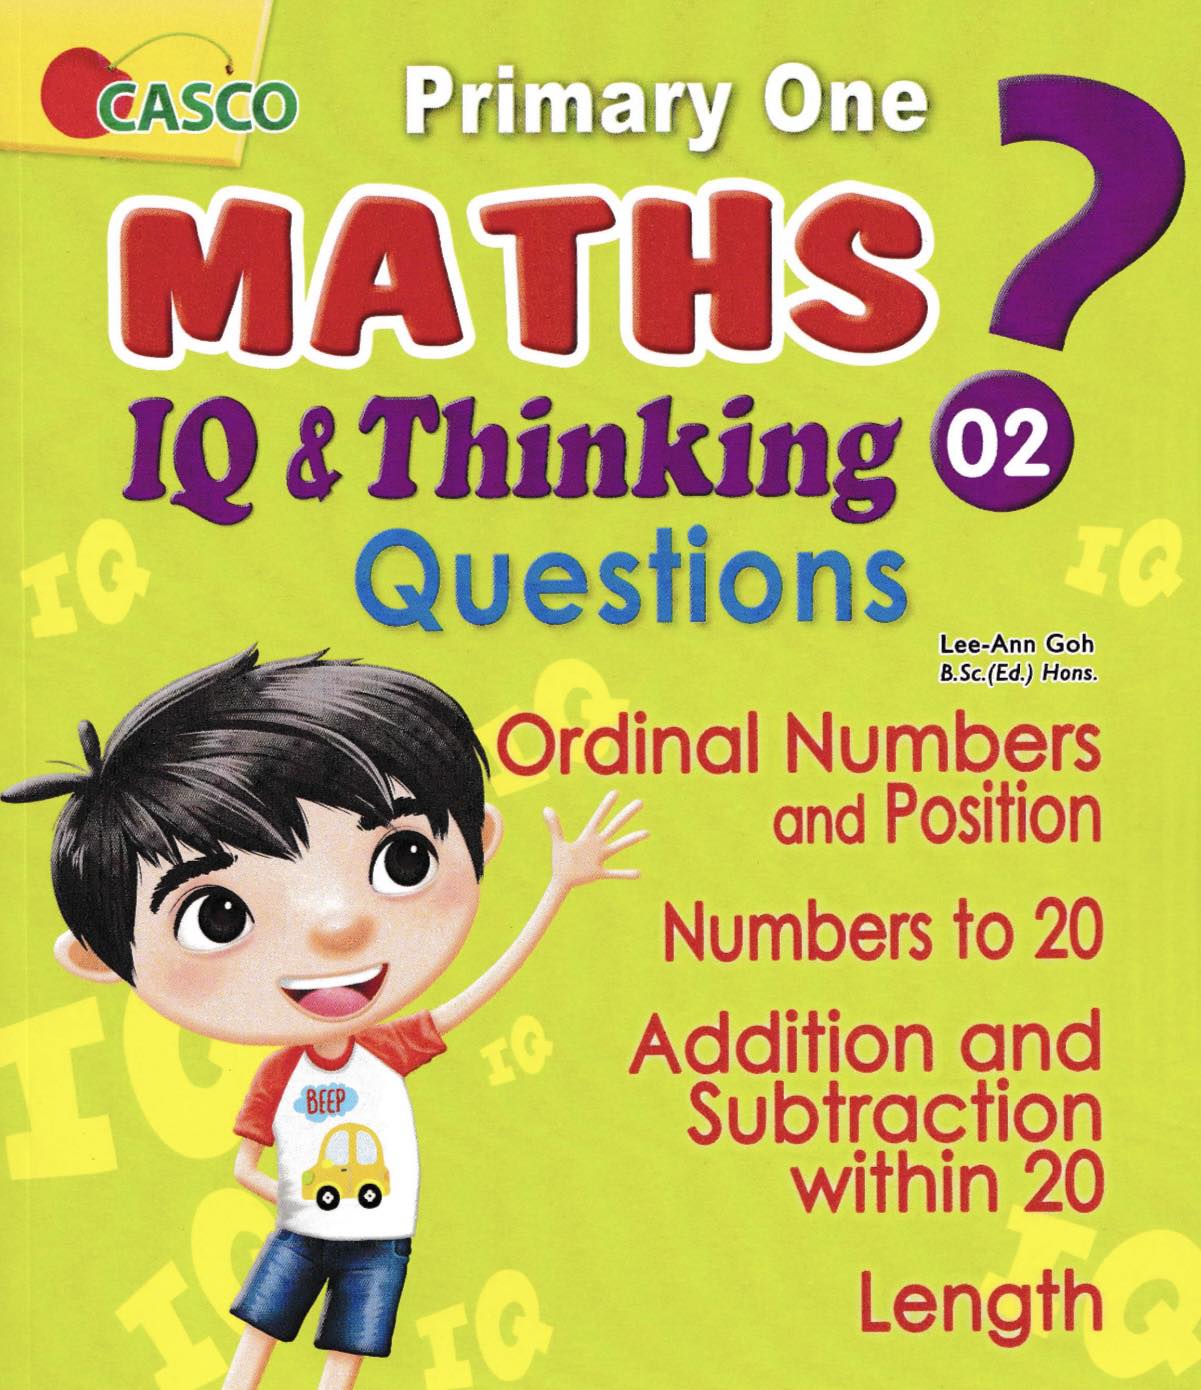 Primary One Maths IQ & Thinking Questions